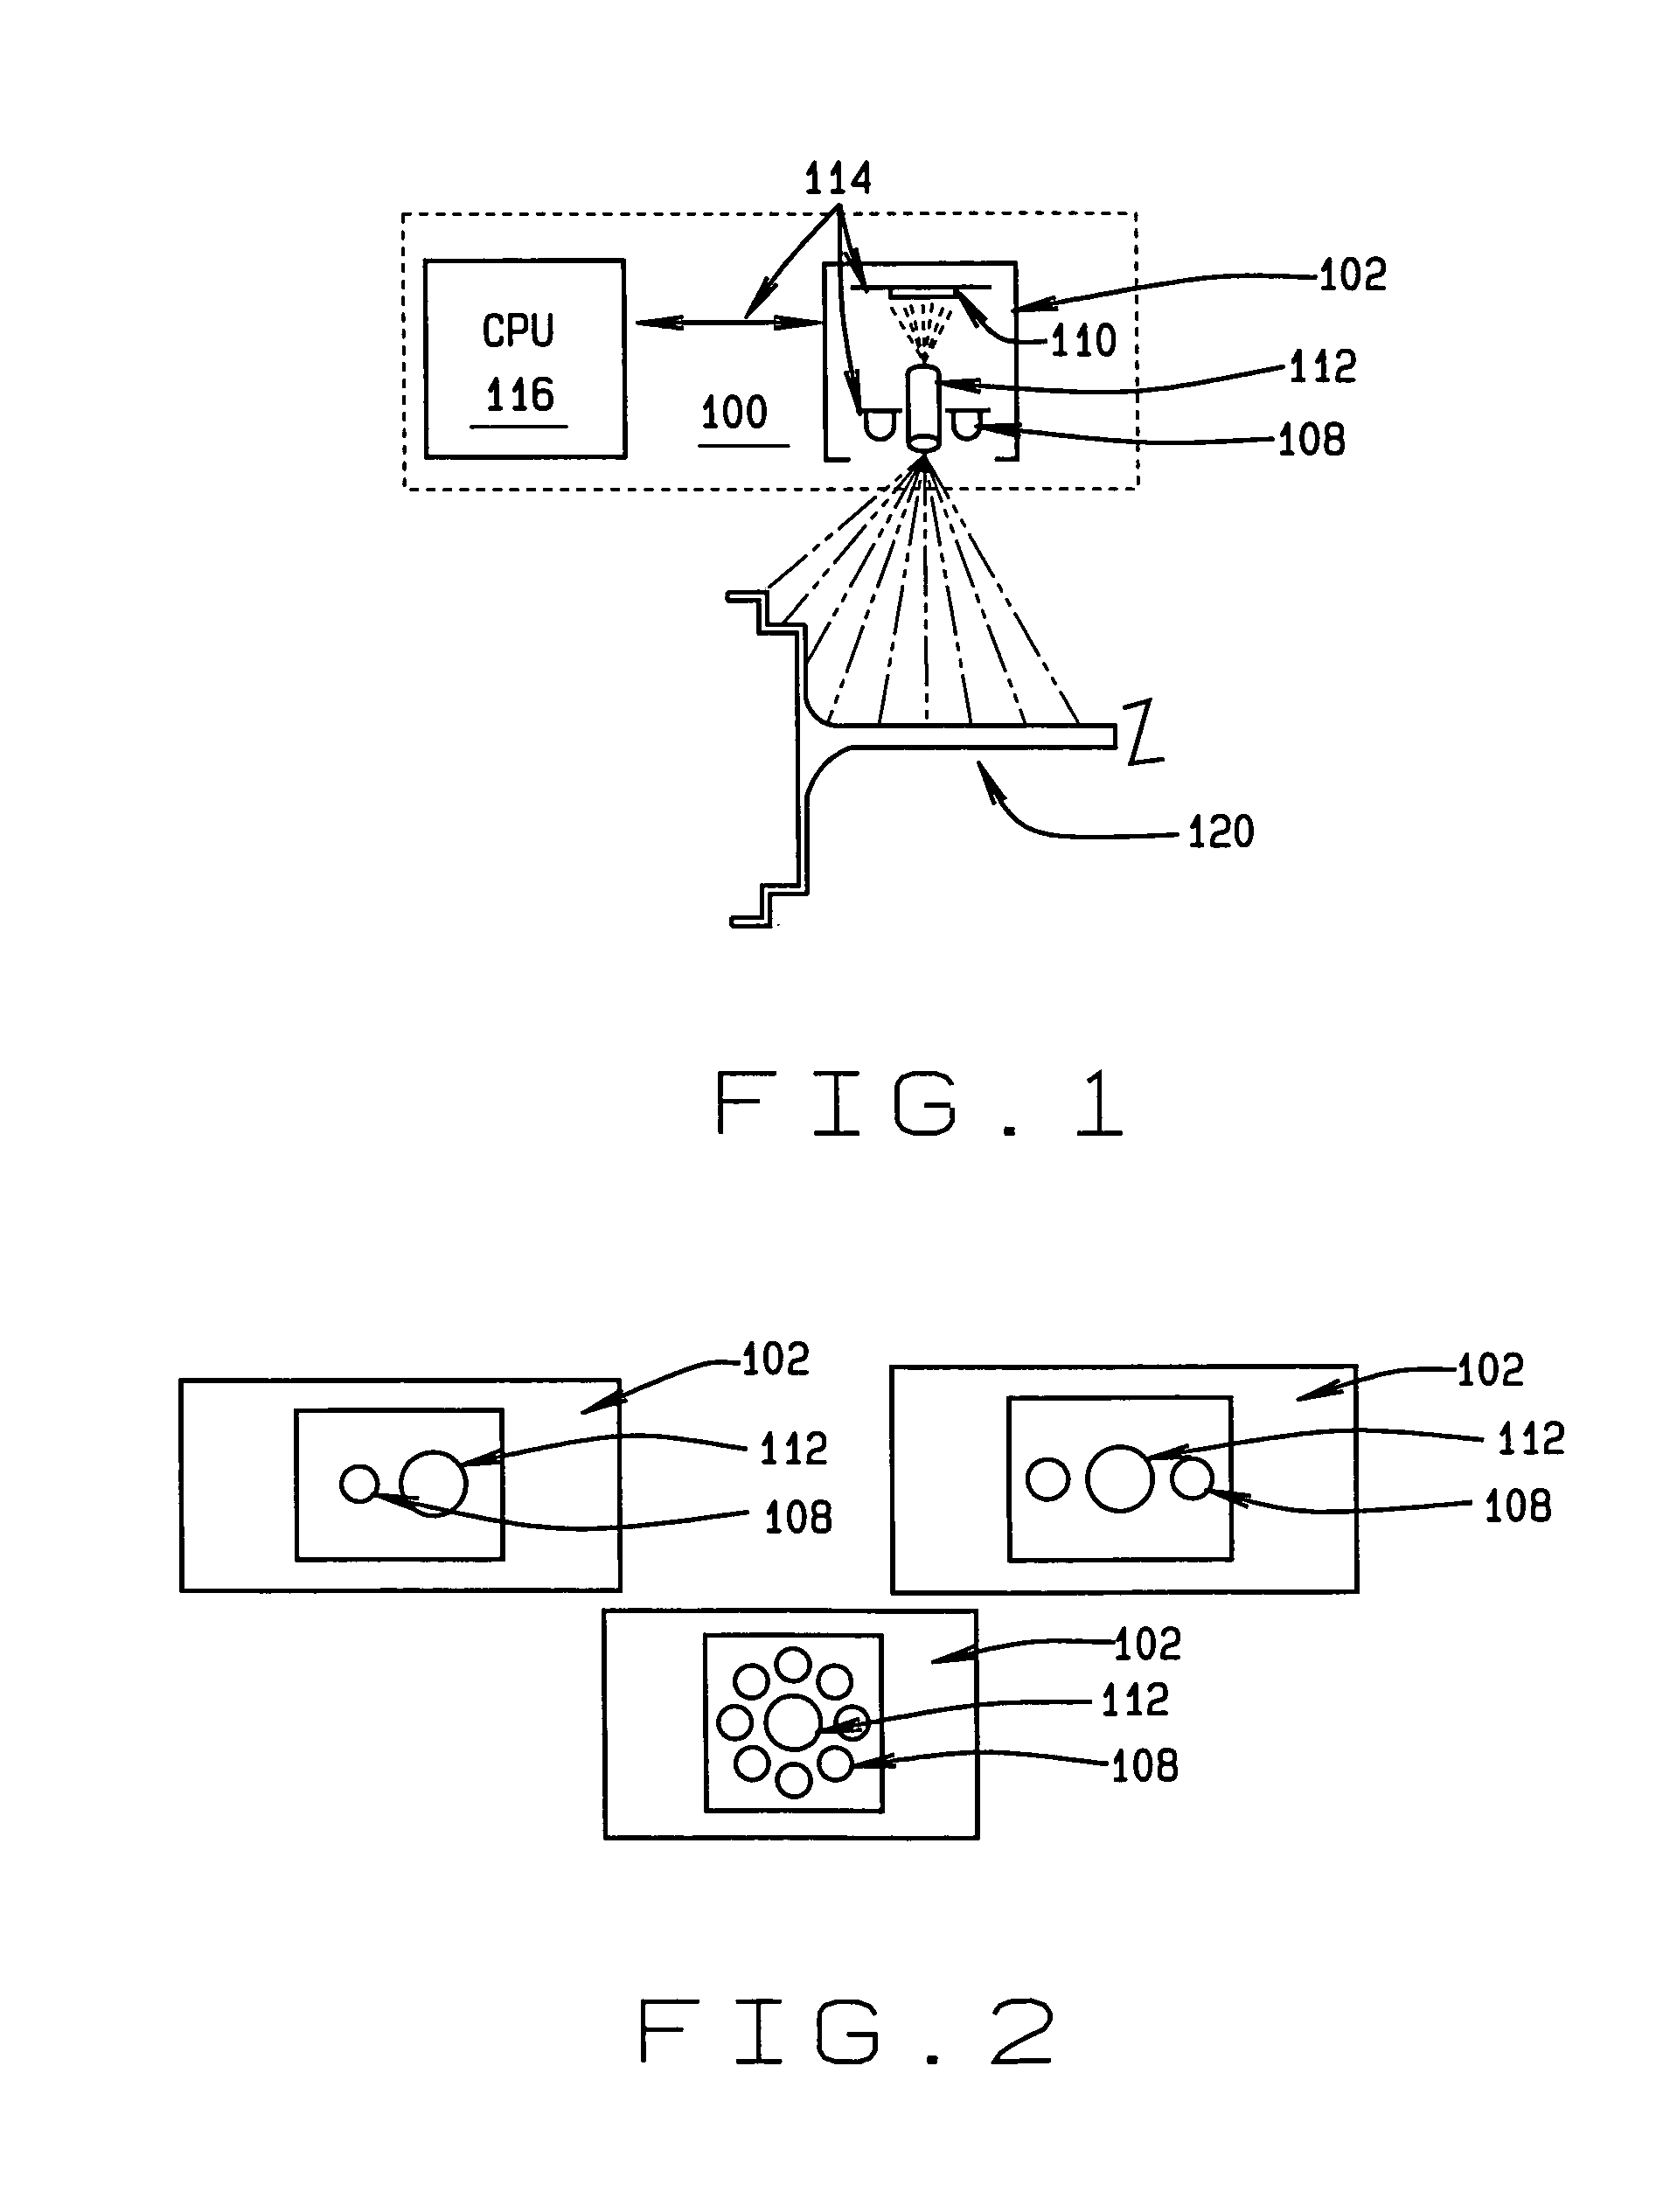 Method and apparatus for vehicle service system with imaging components